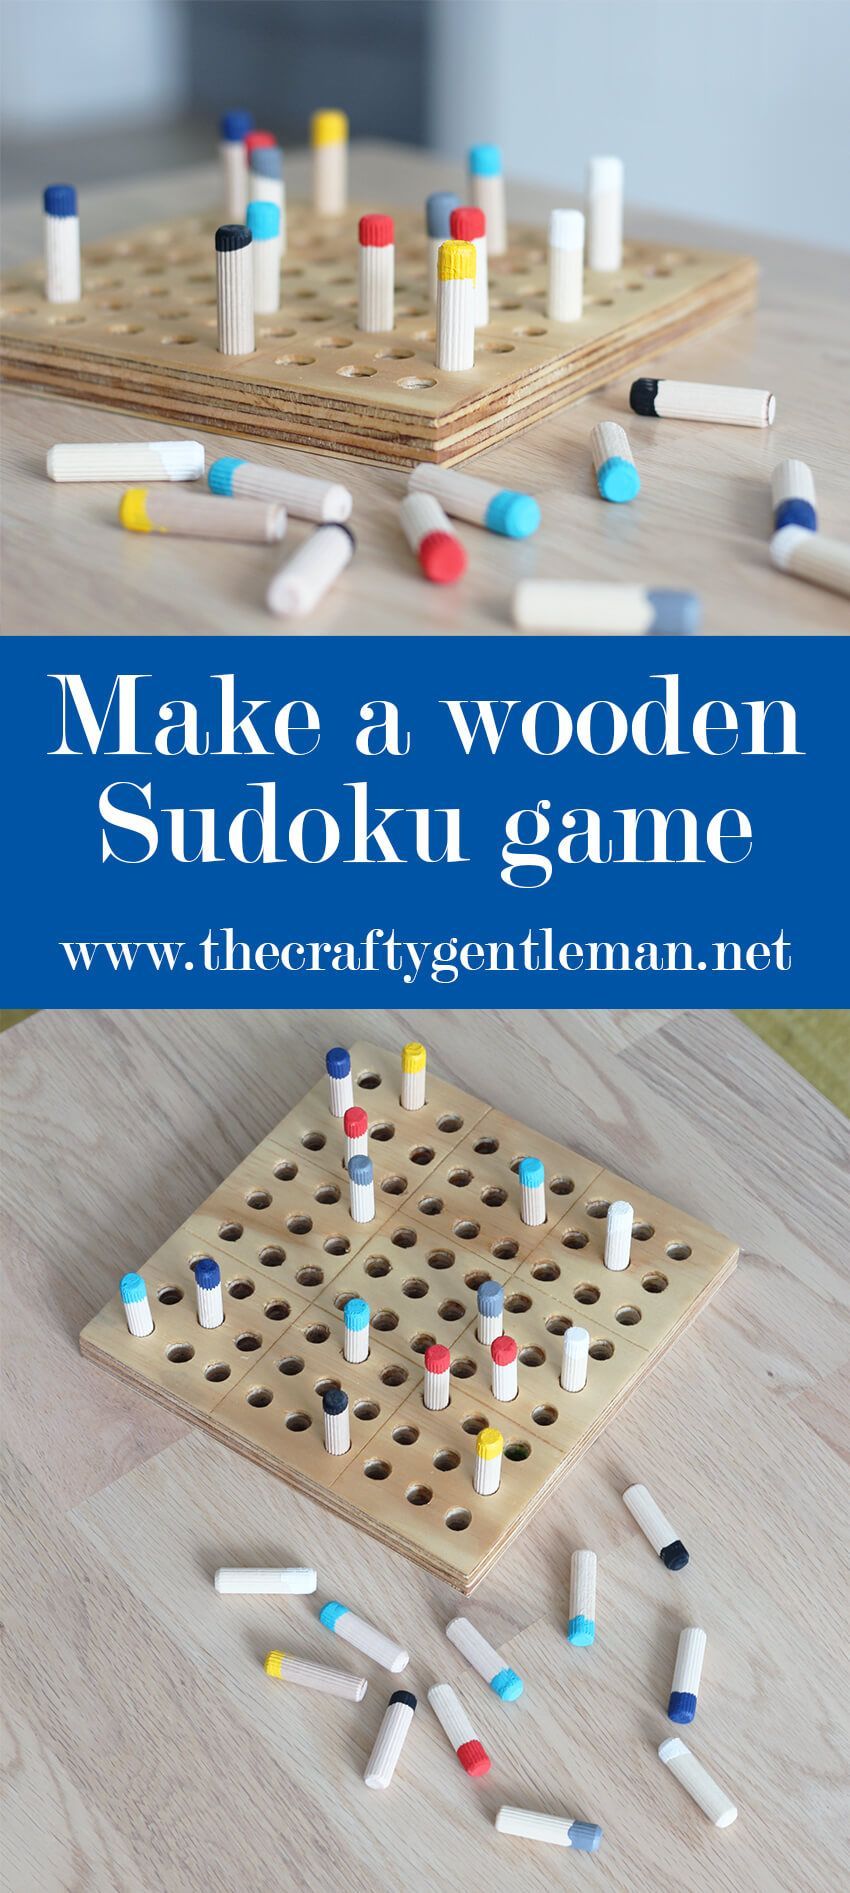 DIY Wooden Sudoku Game | Woodworking Projects | The Crafty Gentleman - DIY Wooden Sudoku Game | Woodworking Projects | The Crafty Gentleman -   18 diy Easy men ideas